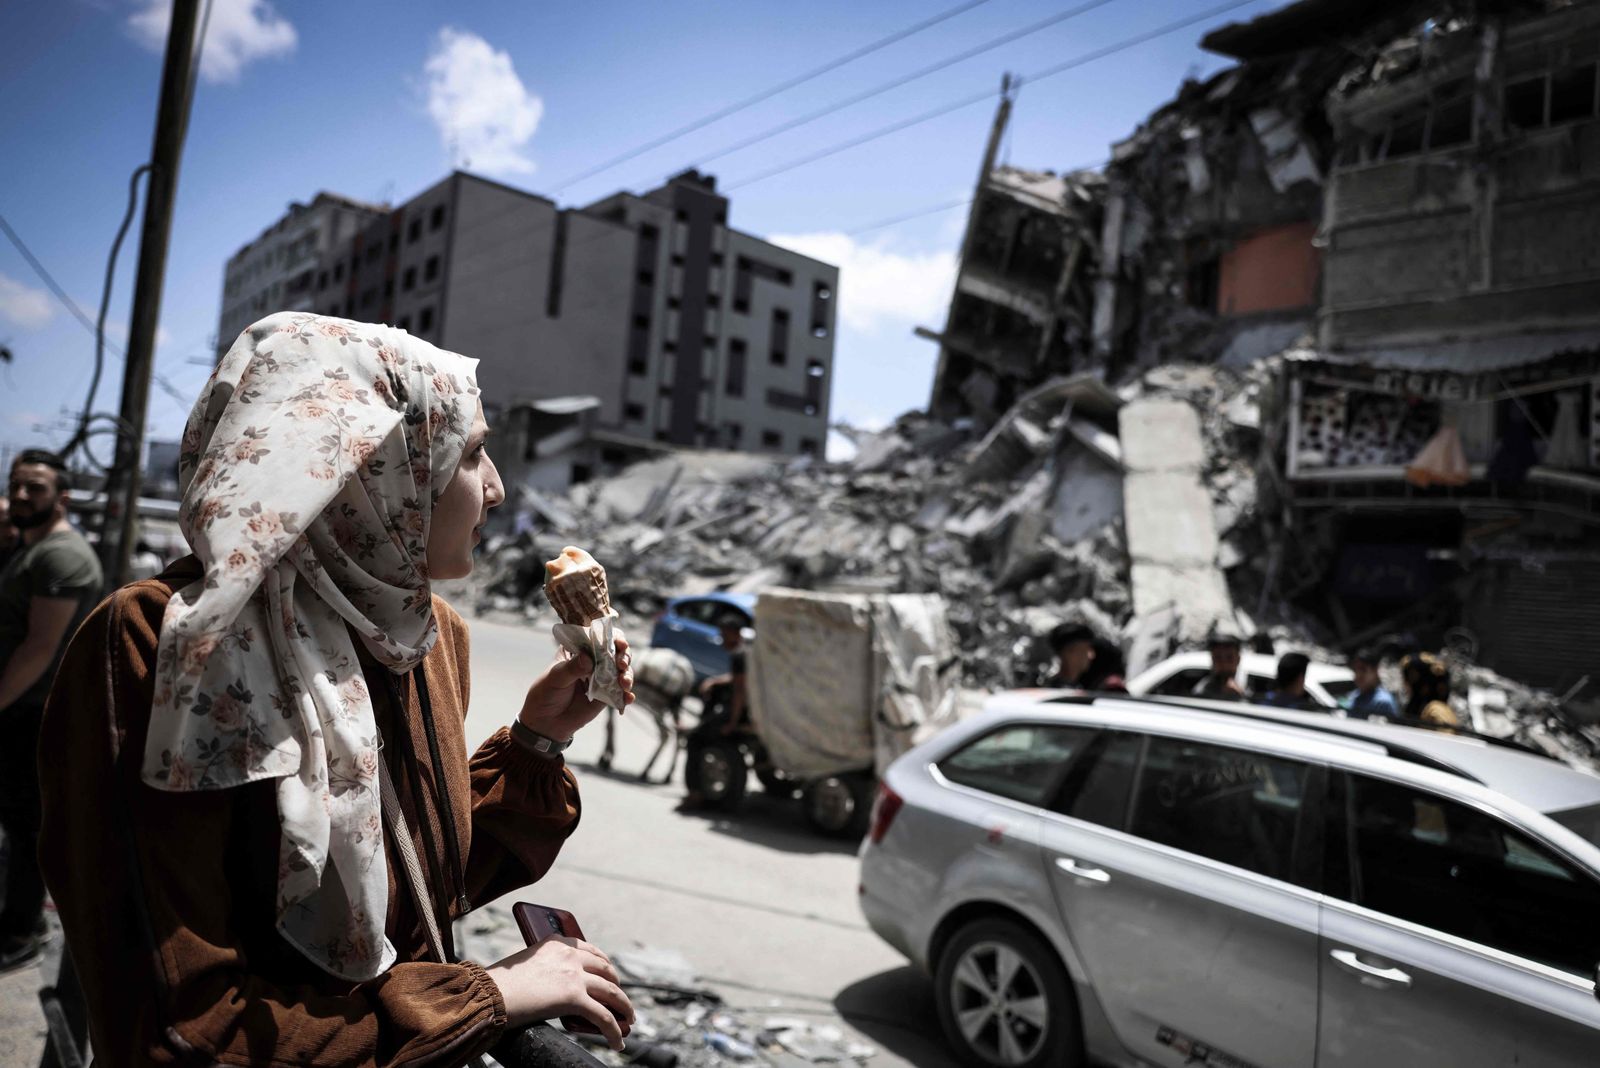 A Palestinian woman eats ice-cream in front of the destroyed Al-Shuruq building, destroyed by an Israeli air strike, on May 22, 2021, in Gaza City. - A ceasefire between Israel and Hamas, the Islamist movement which controls the Gaza Strip, appeared to hold today after 11 days of deadly fighting that pounded the Palestinian enclave and forced countless Israelis to seek shelter from rockets. (Photo by MAHMUD HAMS / AFP) - AFP